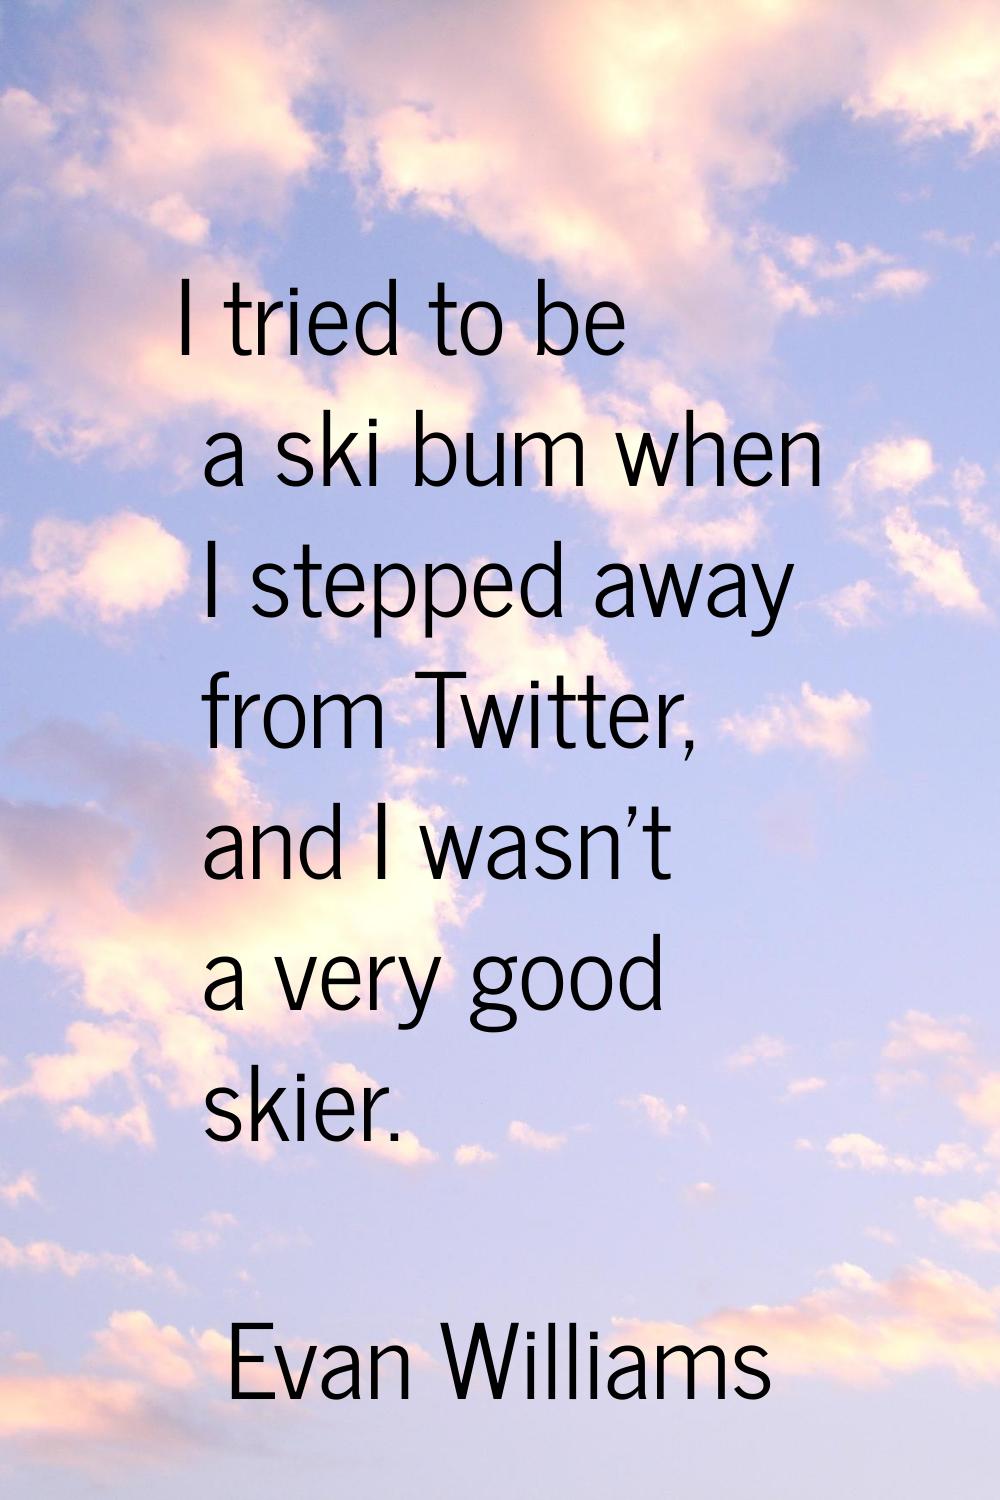 I tried to be a ski bum when I stepped away from Twitter, and I wasn't a very good skier.